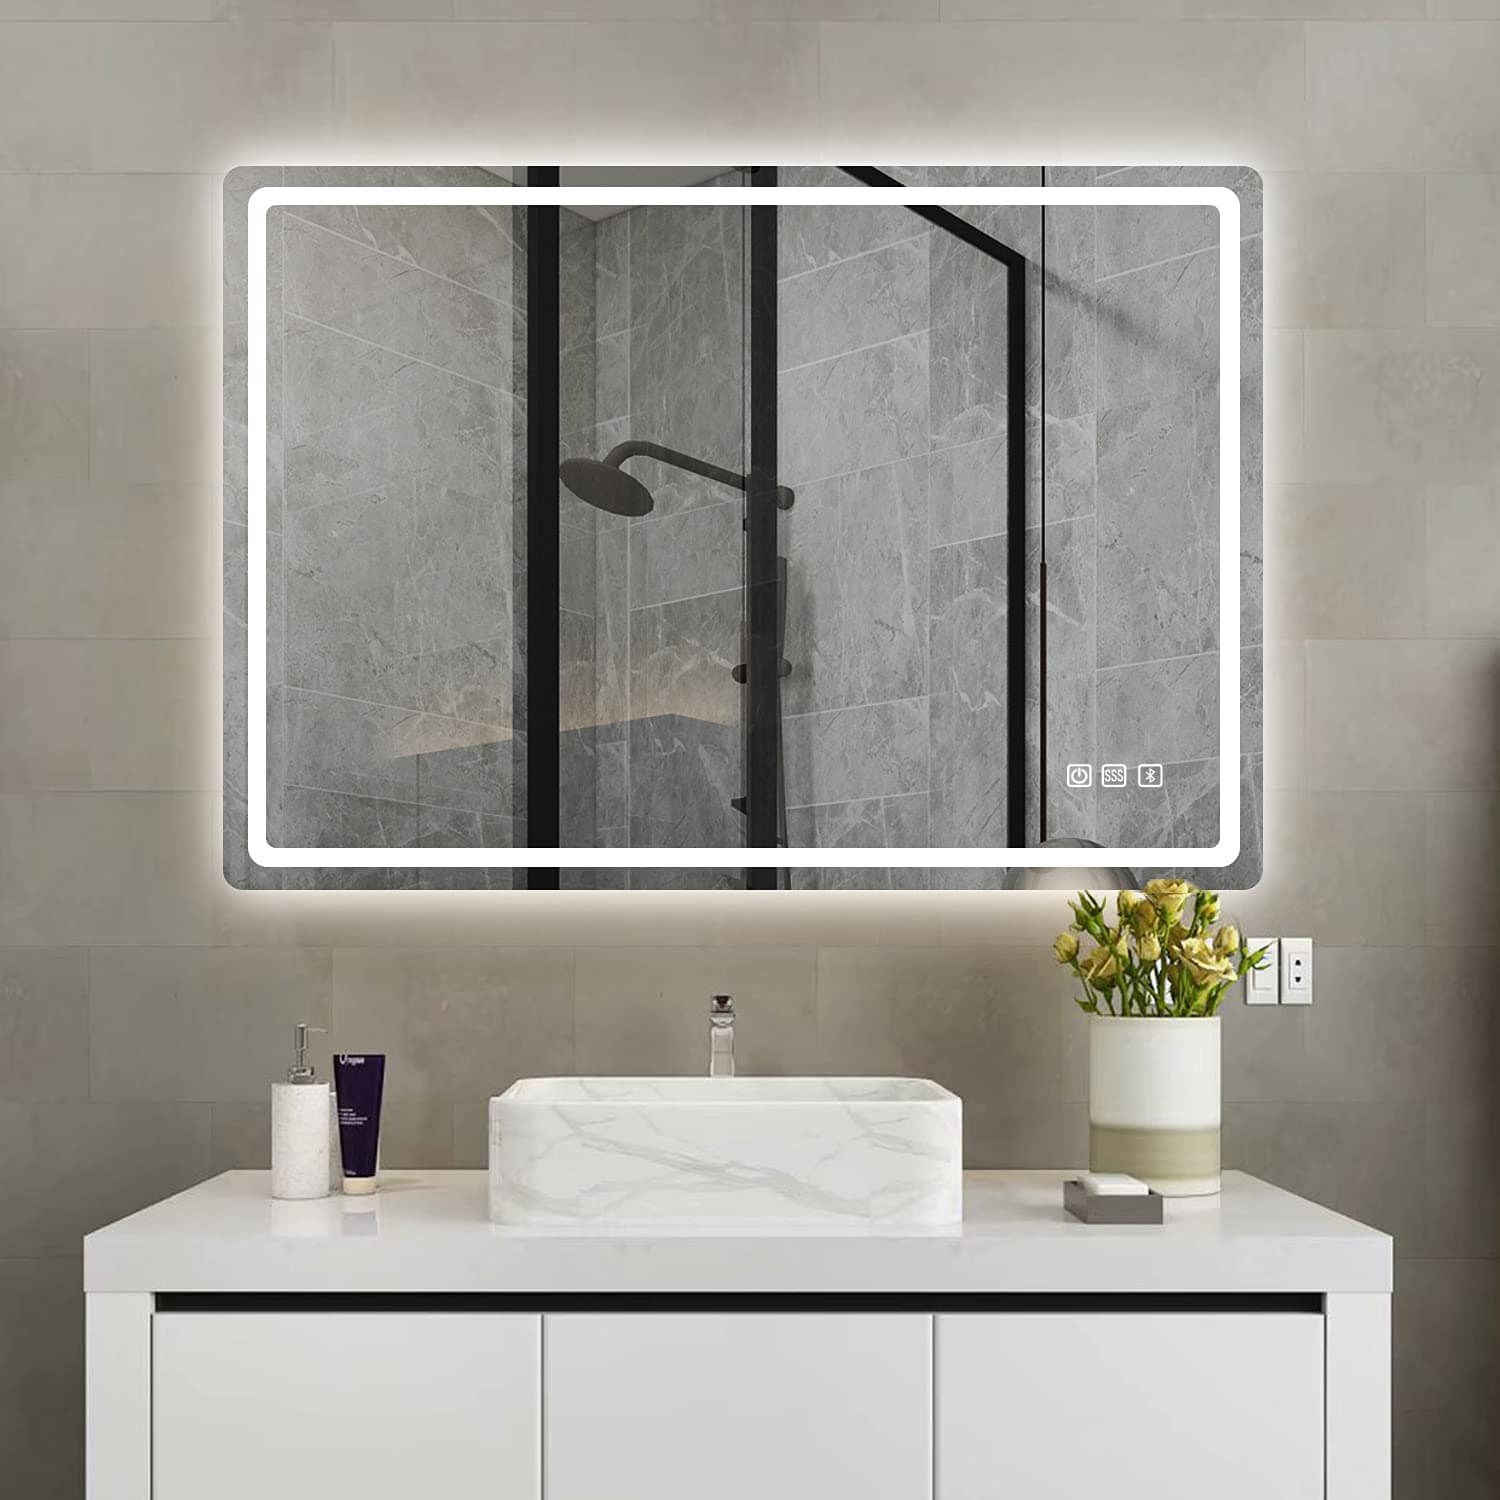 14 Inch X 4 Pieces Square Full Length Mirror Tiles Frameless Wall Mirror  for Vanity Bedroom - China Home Decoration, Bathroom Mirror